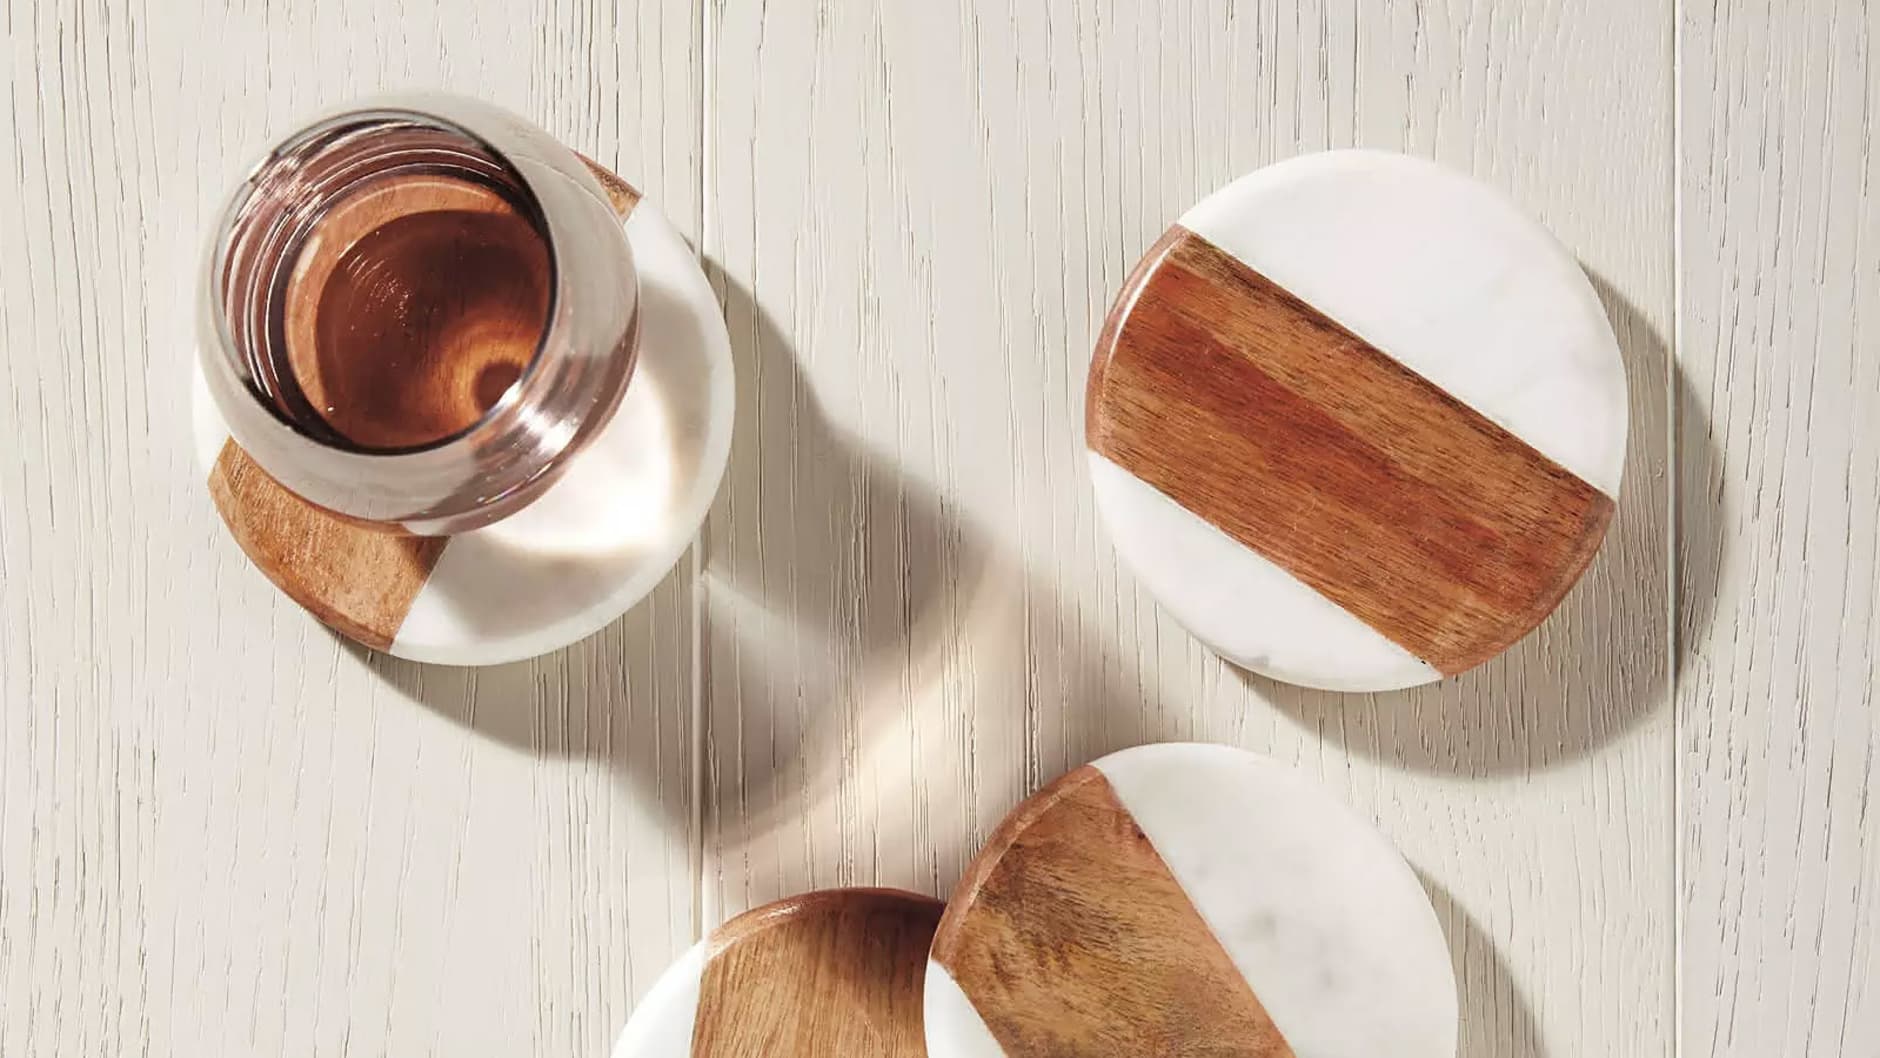 The 15 Best Drink Coasters to Add Style While Safeguarding Your Furniture